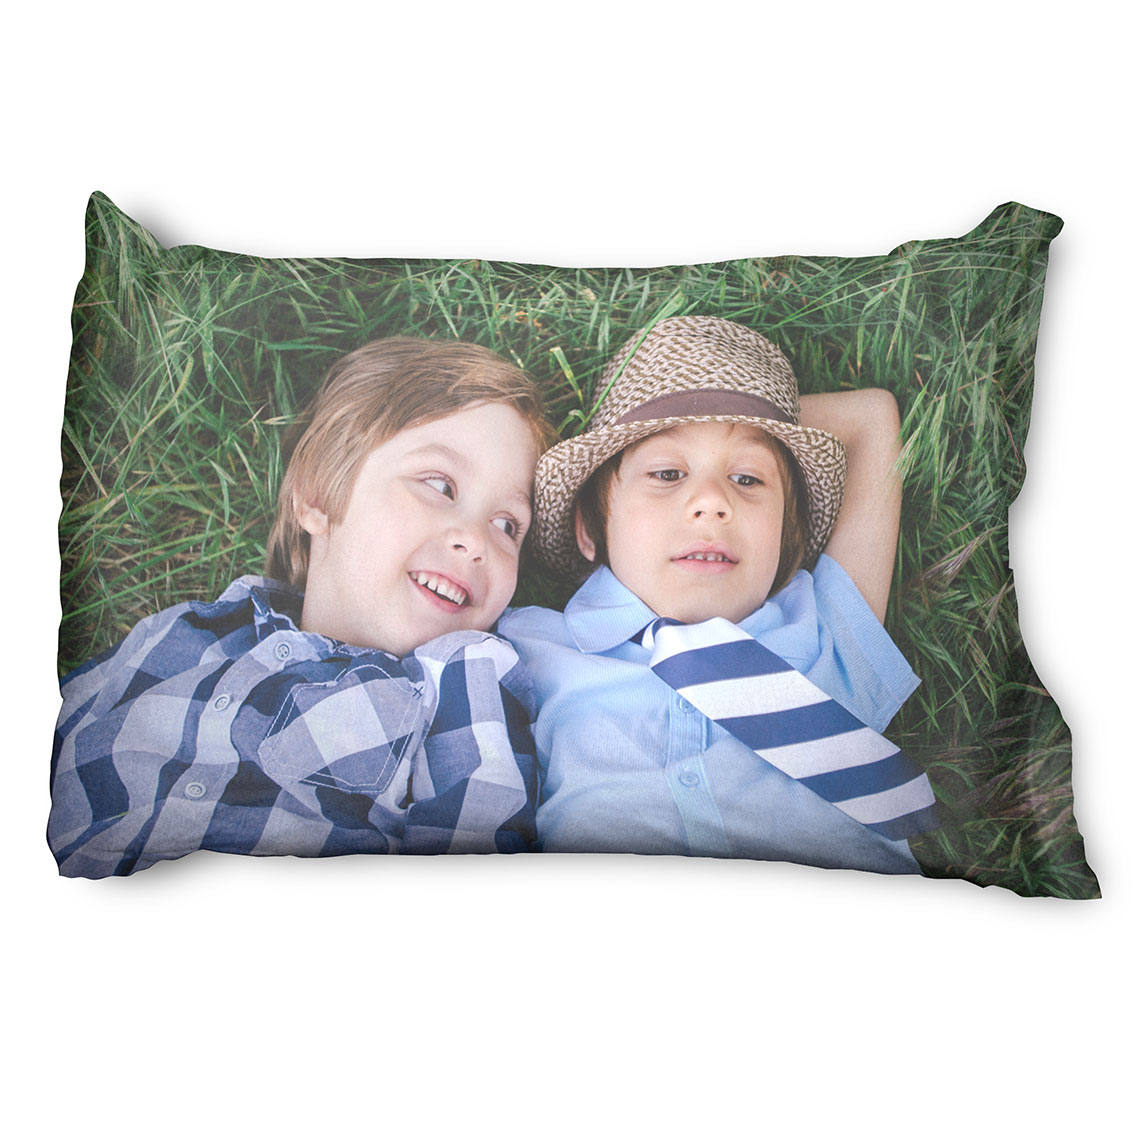 White Pillow Case Cover Personalised 45x75 Polycotton Printed With Your Picture 